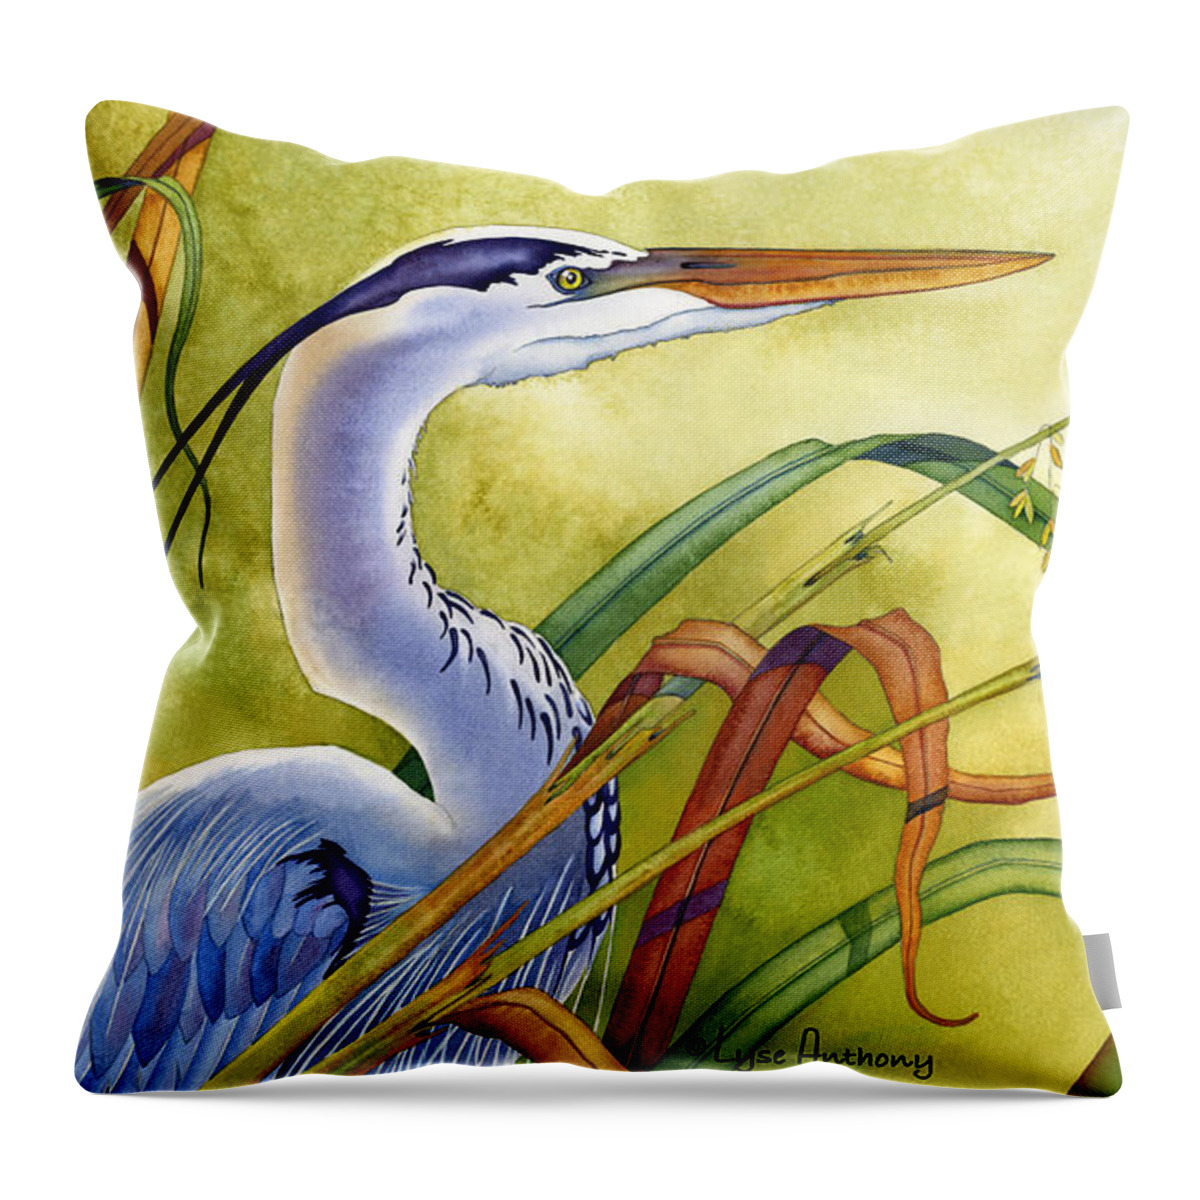 Watercolor Throw Pillow featuring the painting Great Blue Heron by Lyse Anthony